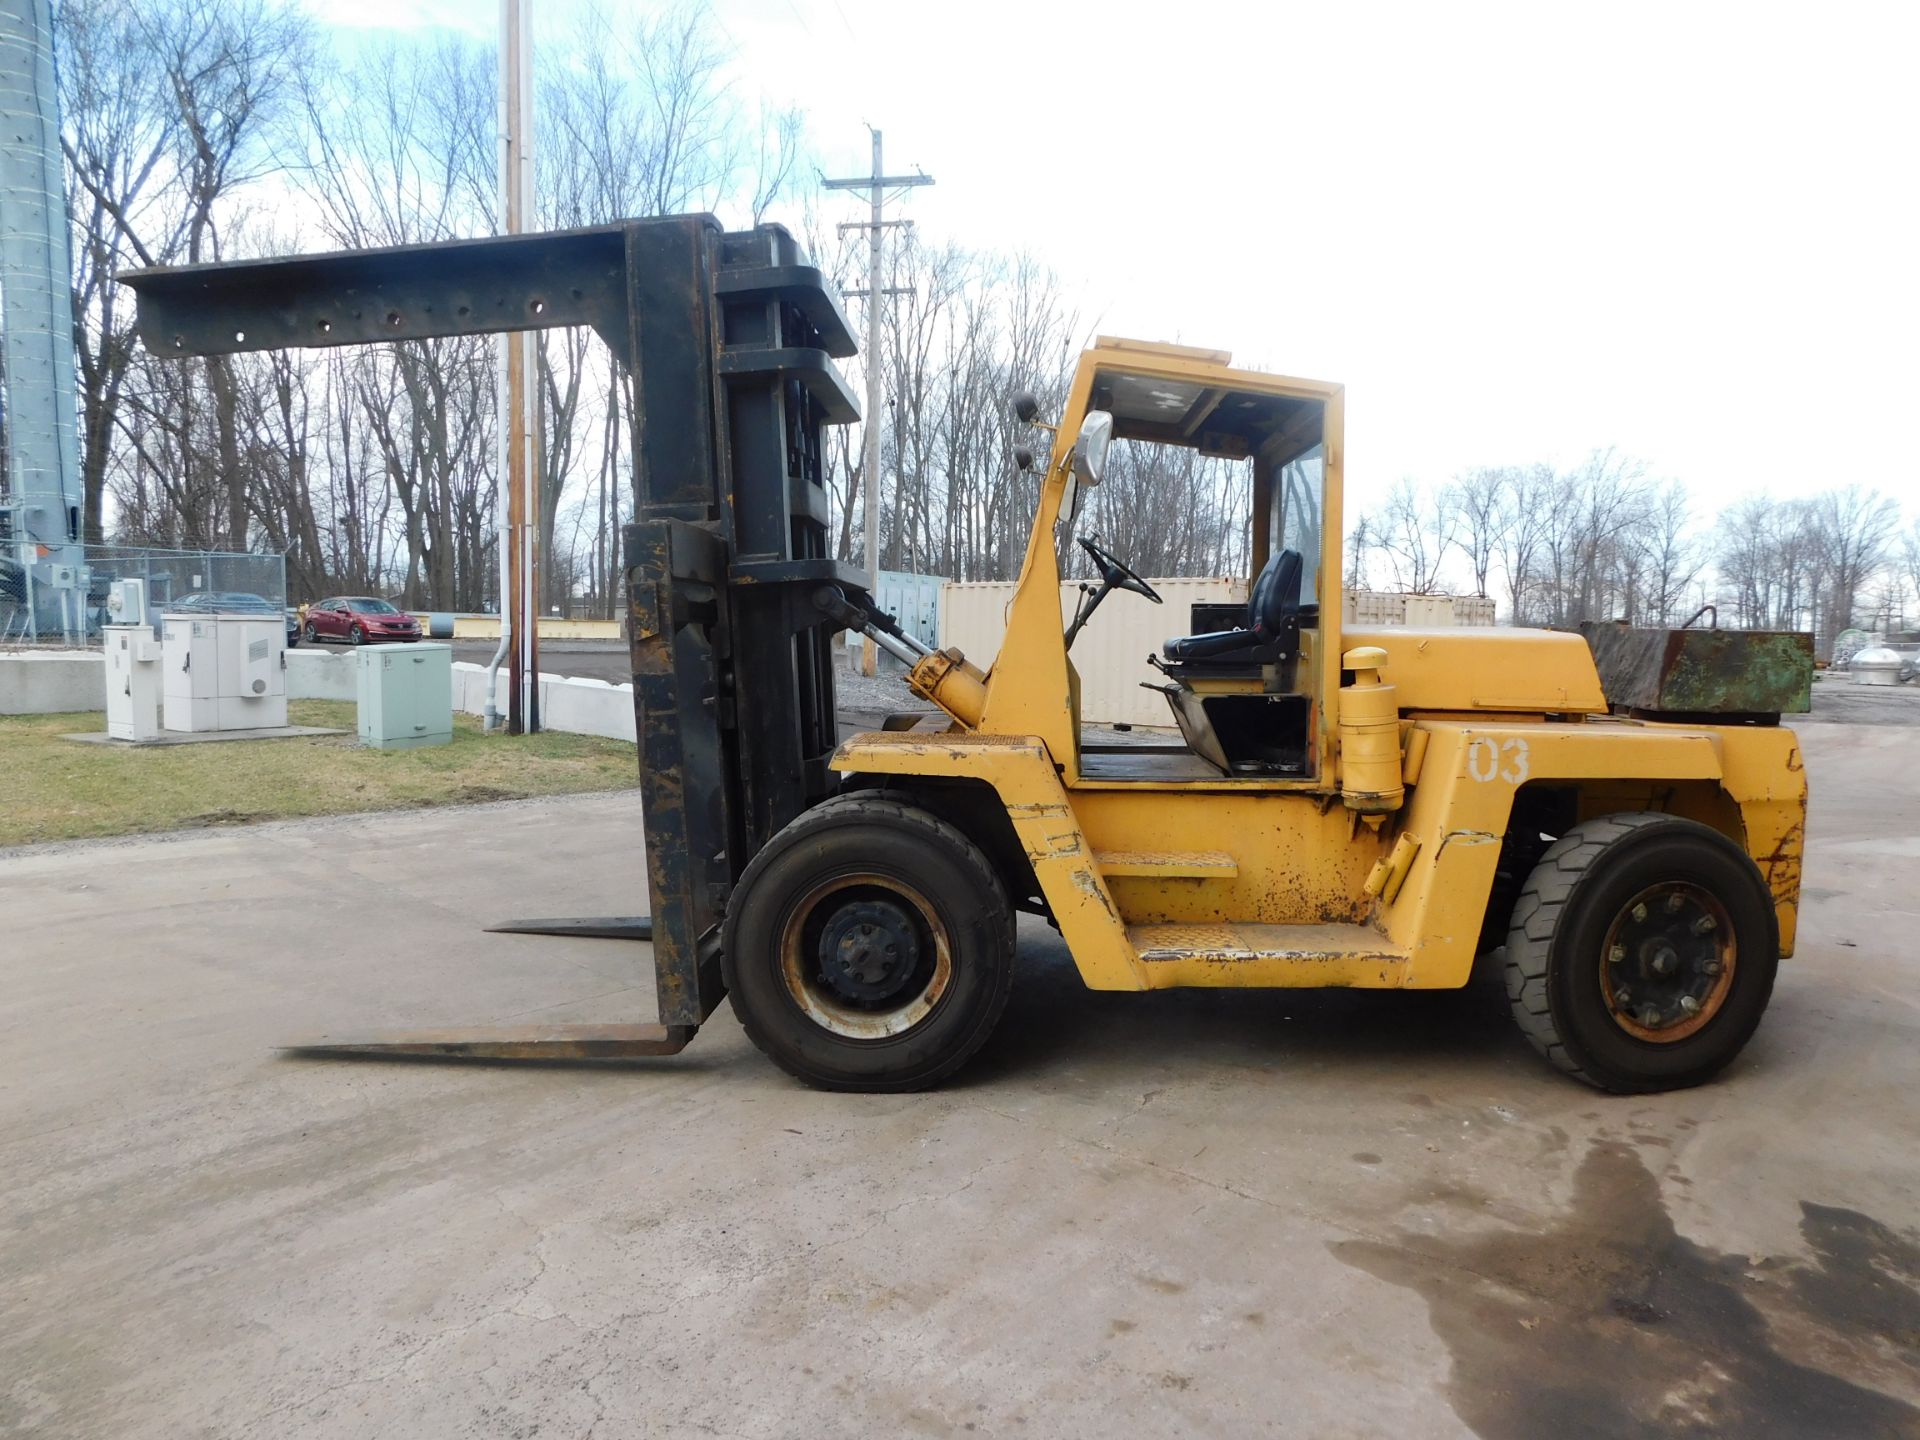 CLARK C500YS250 25,000 LB GAS FORKLIFT WITH 8' BOOM. 60" x 8" FORKS - Image 2 of 17